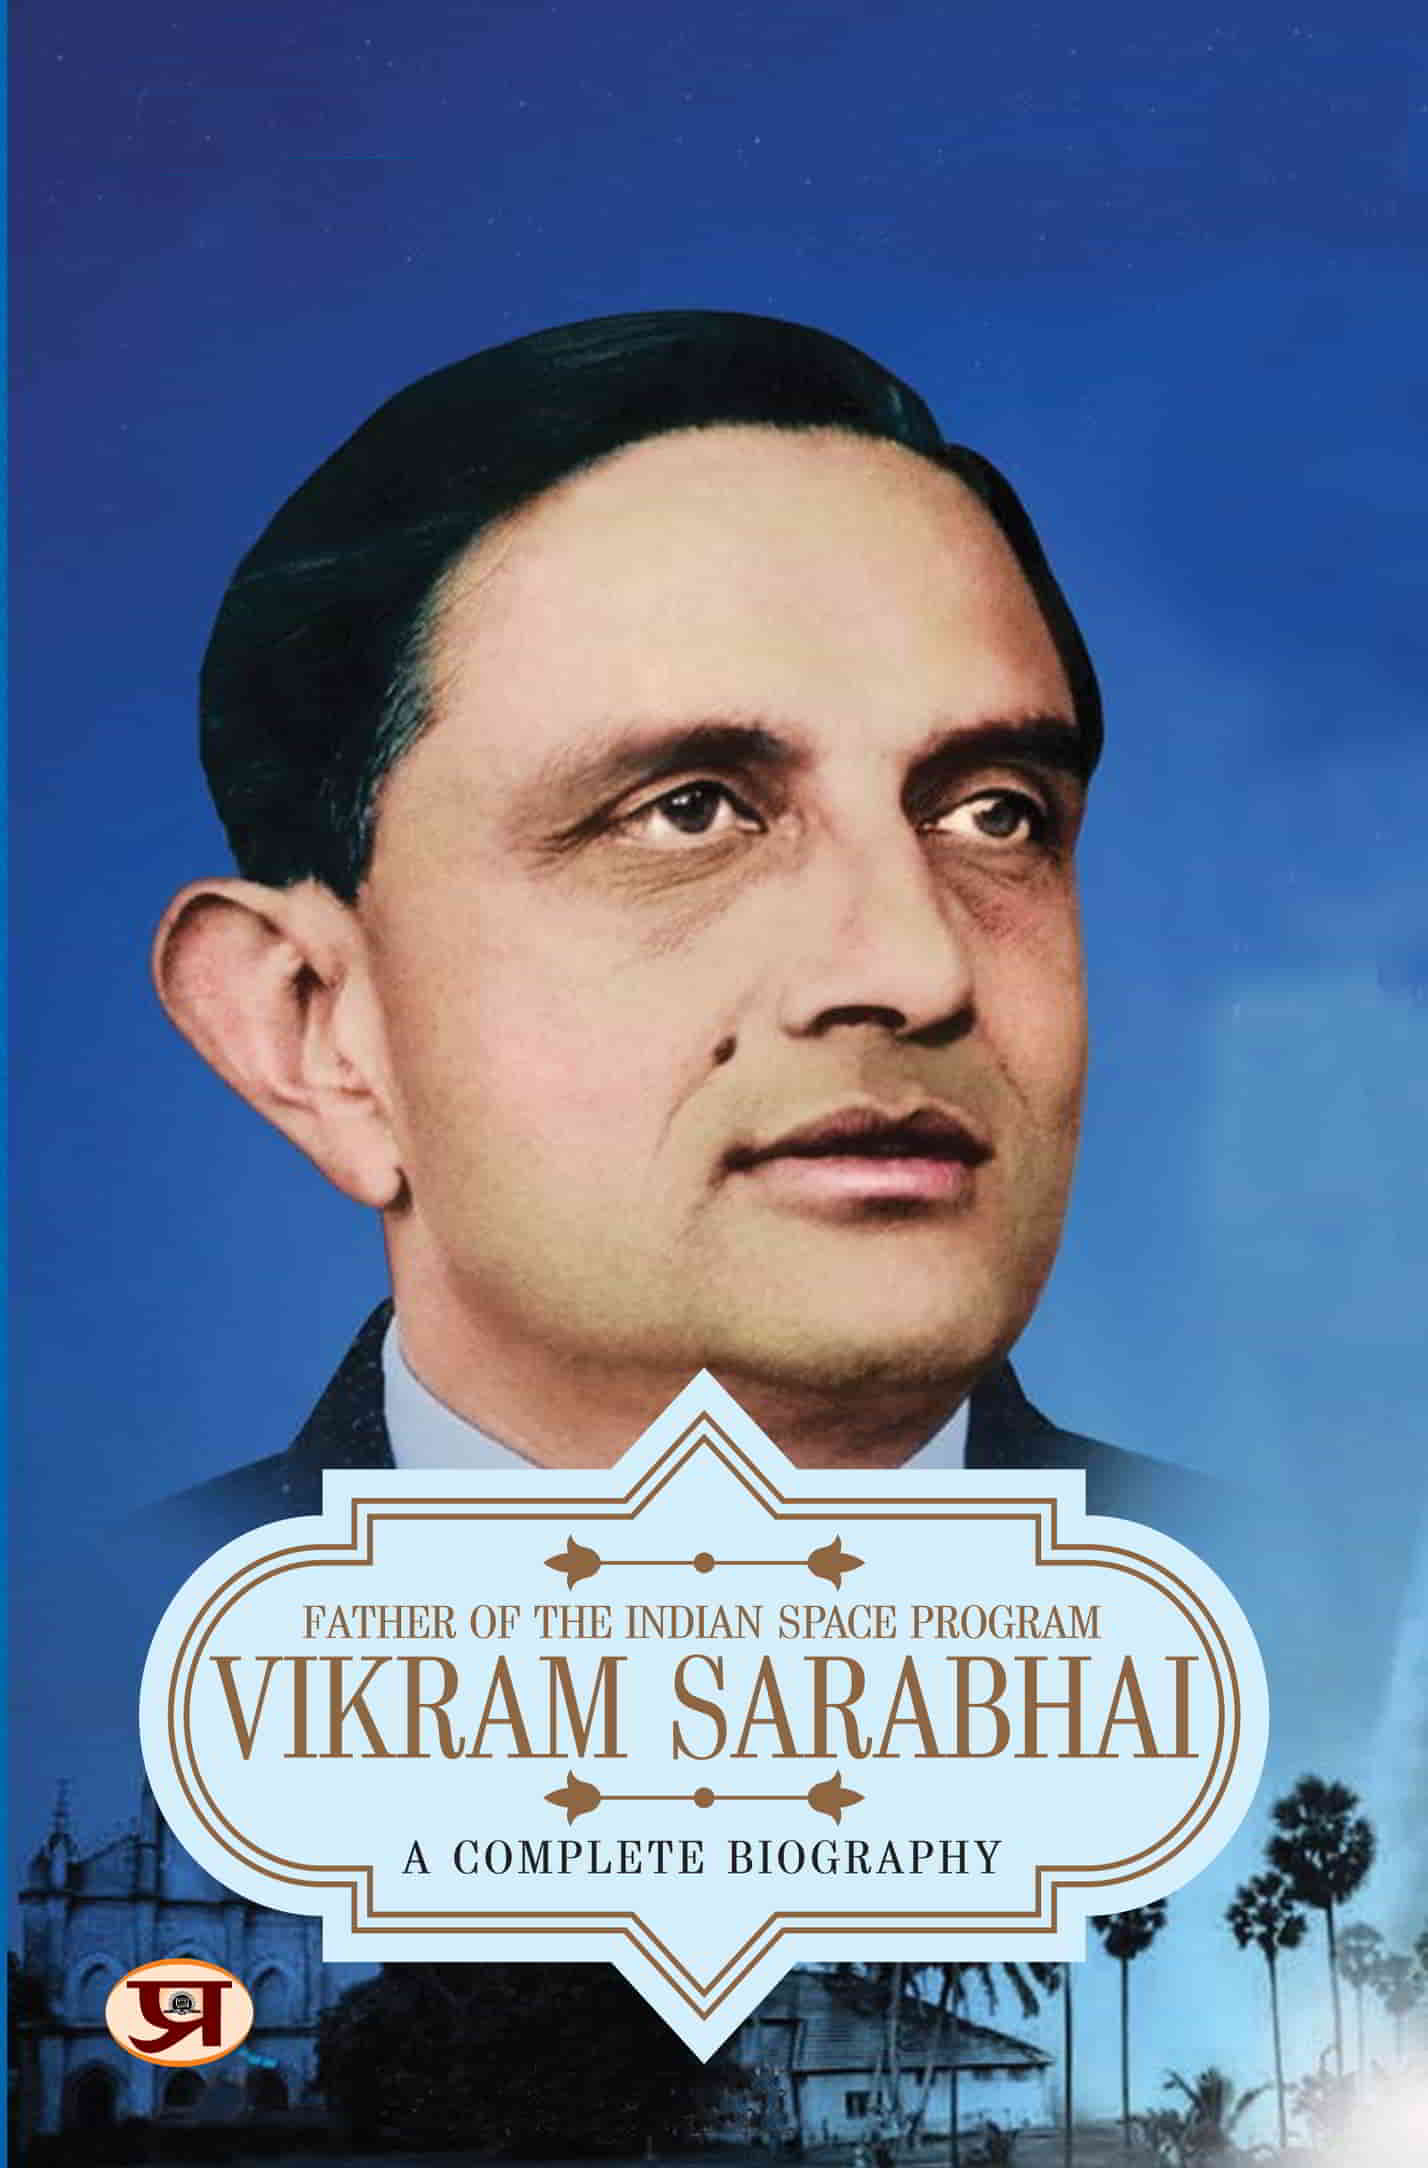 Vikram Sarabhai: A Complete Biography | Father of The Indian Space Program